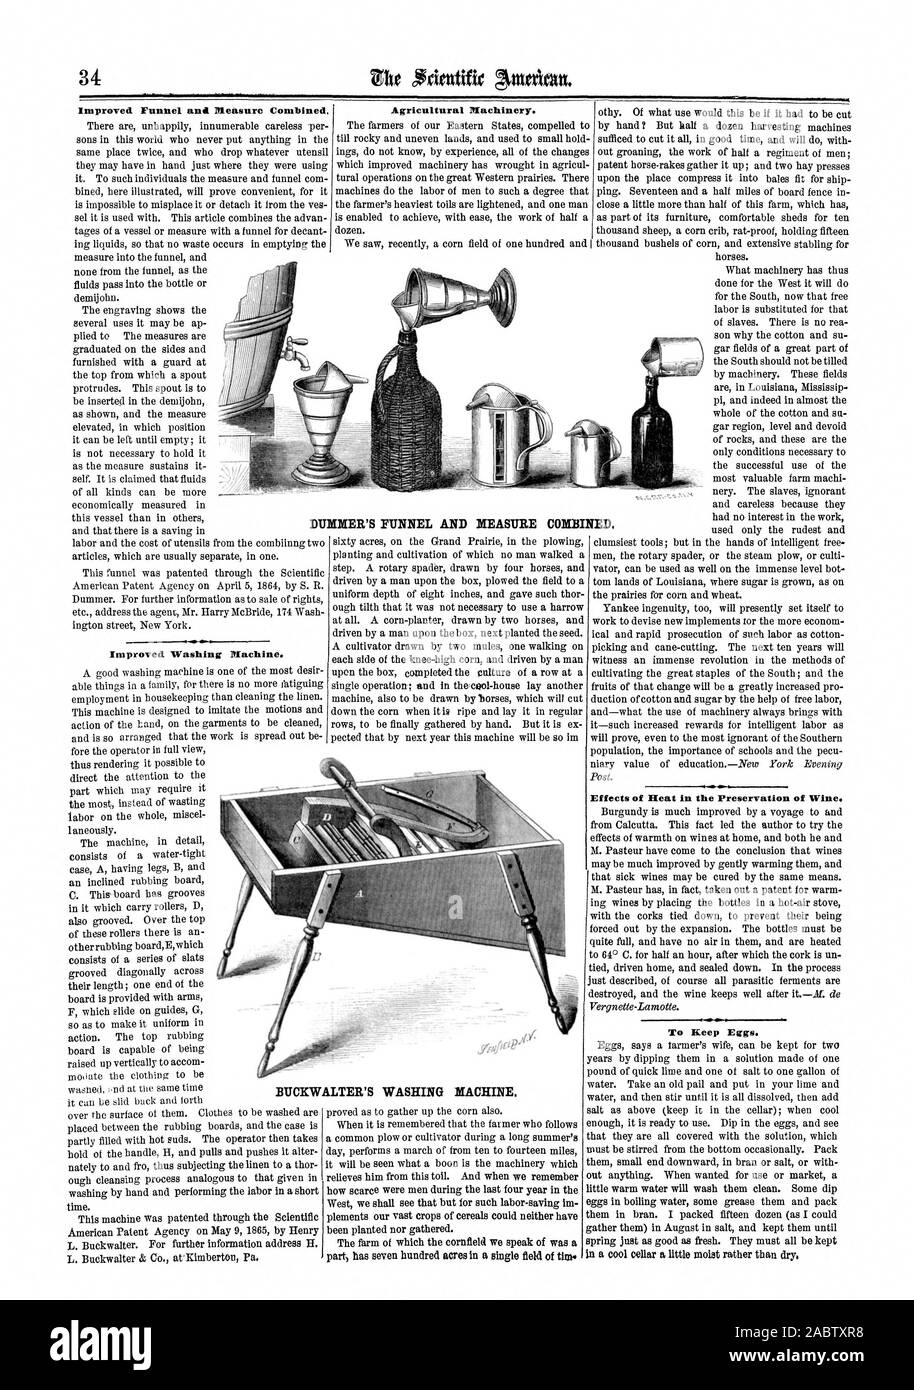 Agricultural Machinery. BUCKWALTER'S WASHING MACHINE. Improved Funnel and Measure Combined. Improved Washing Machine. Effects of seat in the Preservation of Wine. To Keep Eggs. DUMMER'S FUNNEL AND MEASURE COMBINED., scientific american, 1865-07-15 Stock Photo